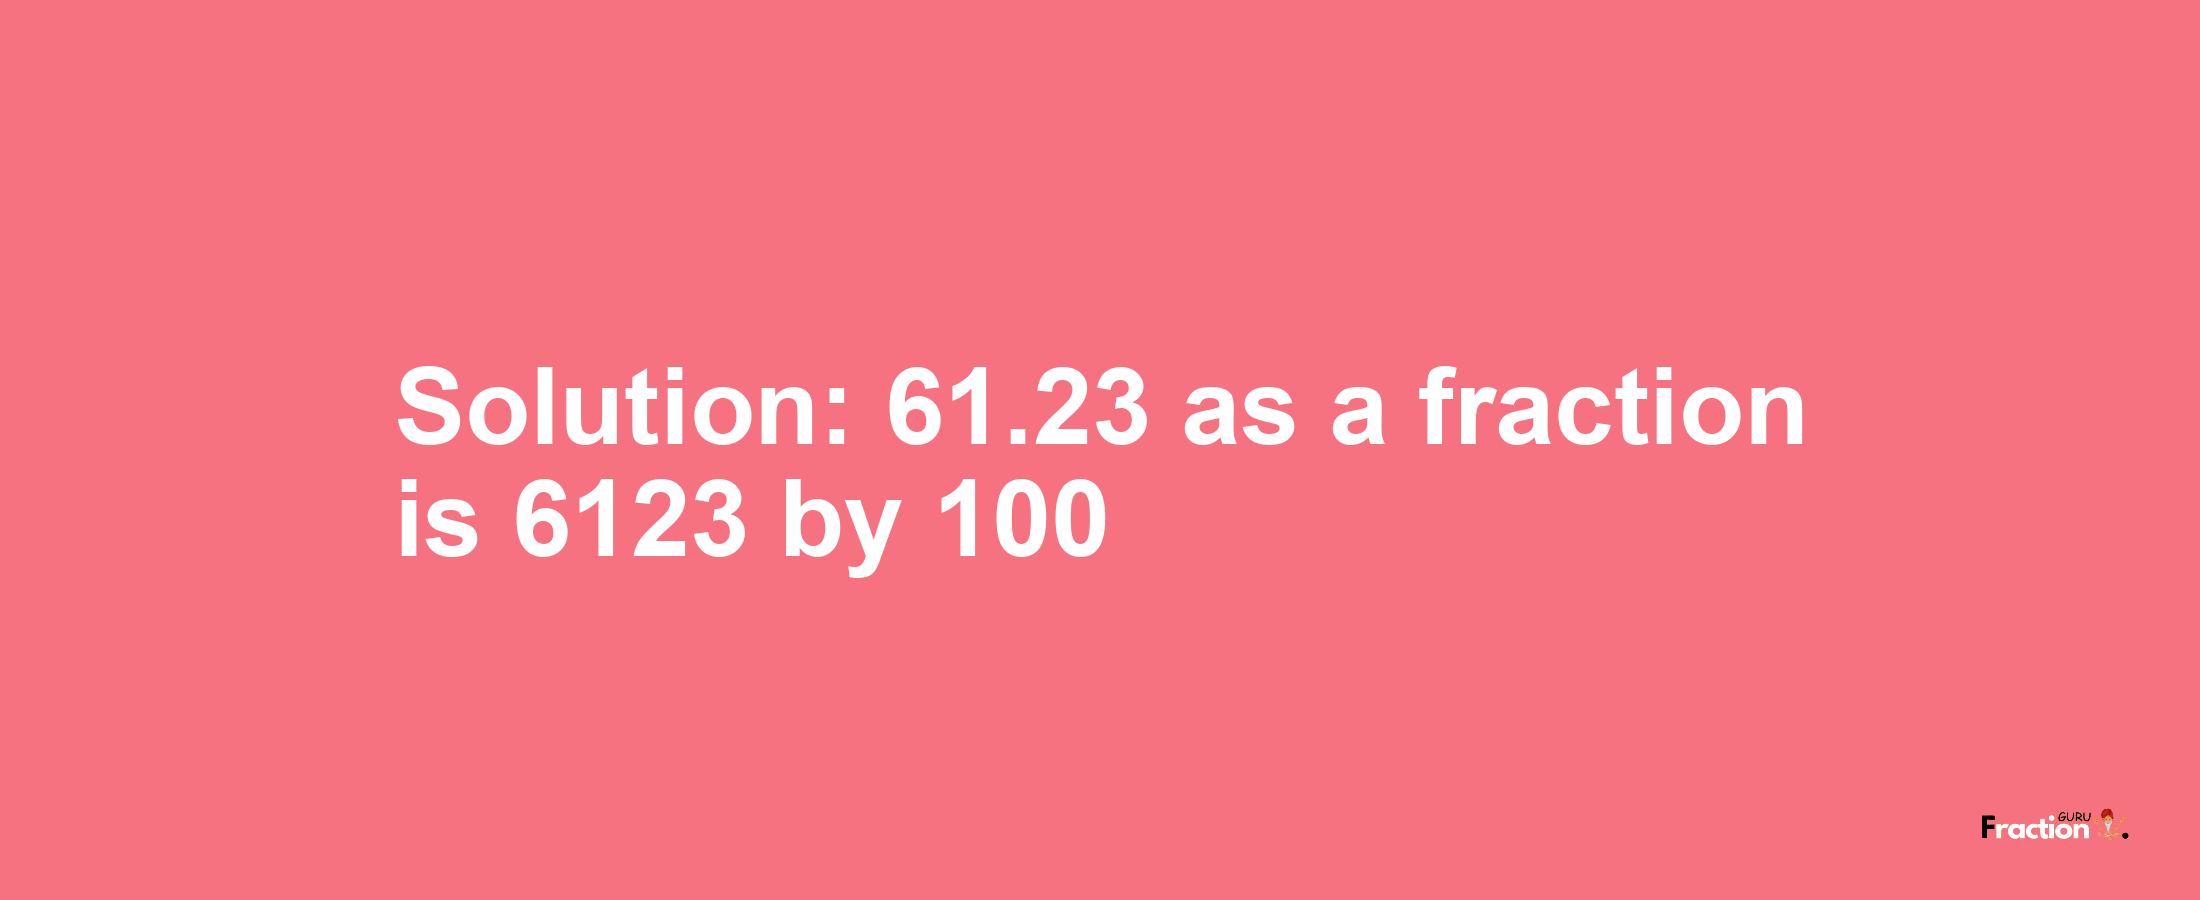 Solution:61.23 as a fraction is 6123/100